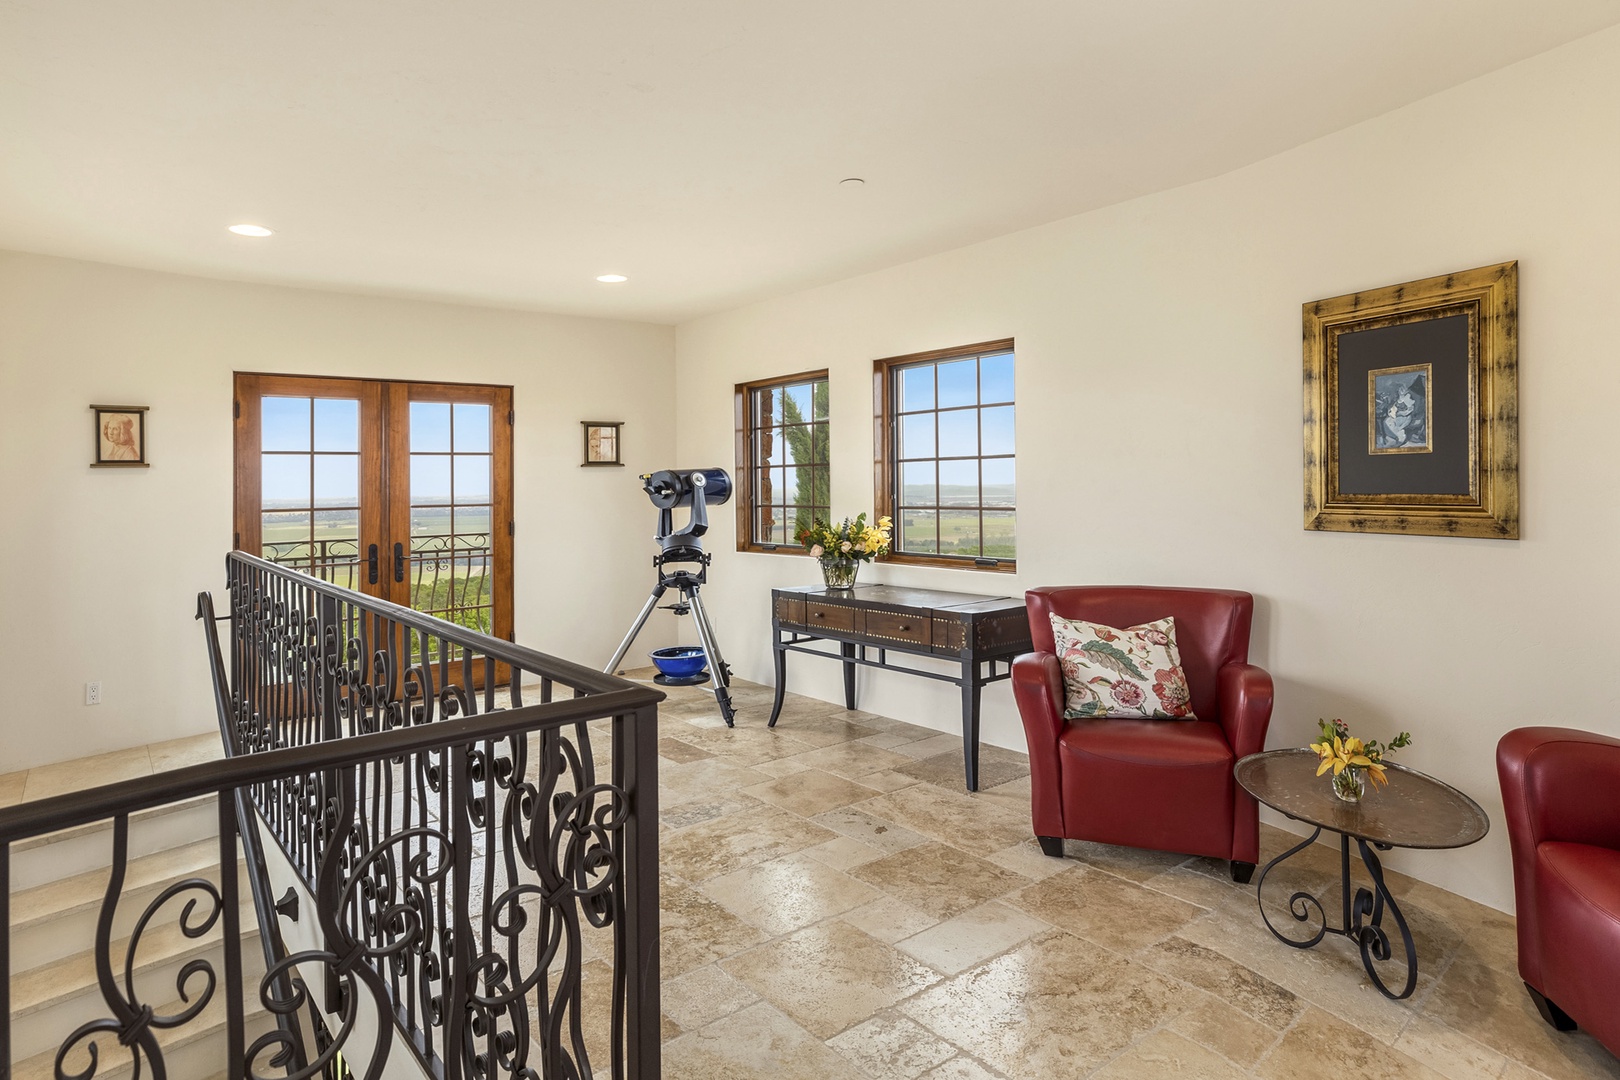 Fairfield Vacation Rentals, Villa Capricho - The Tower with 390-degree California wine country views